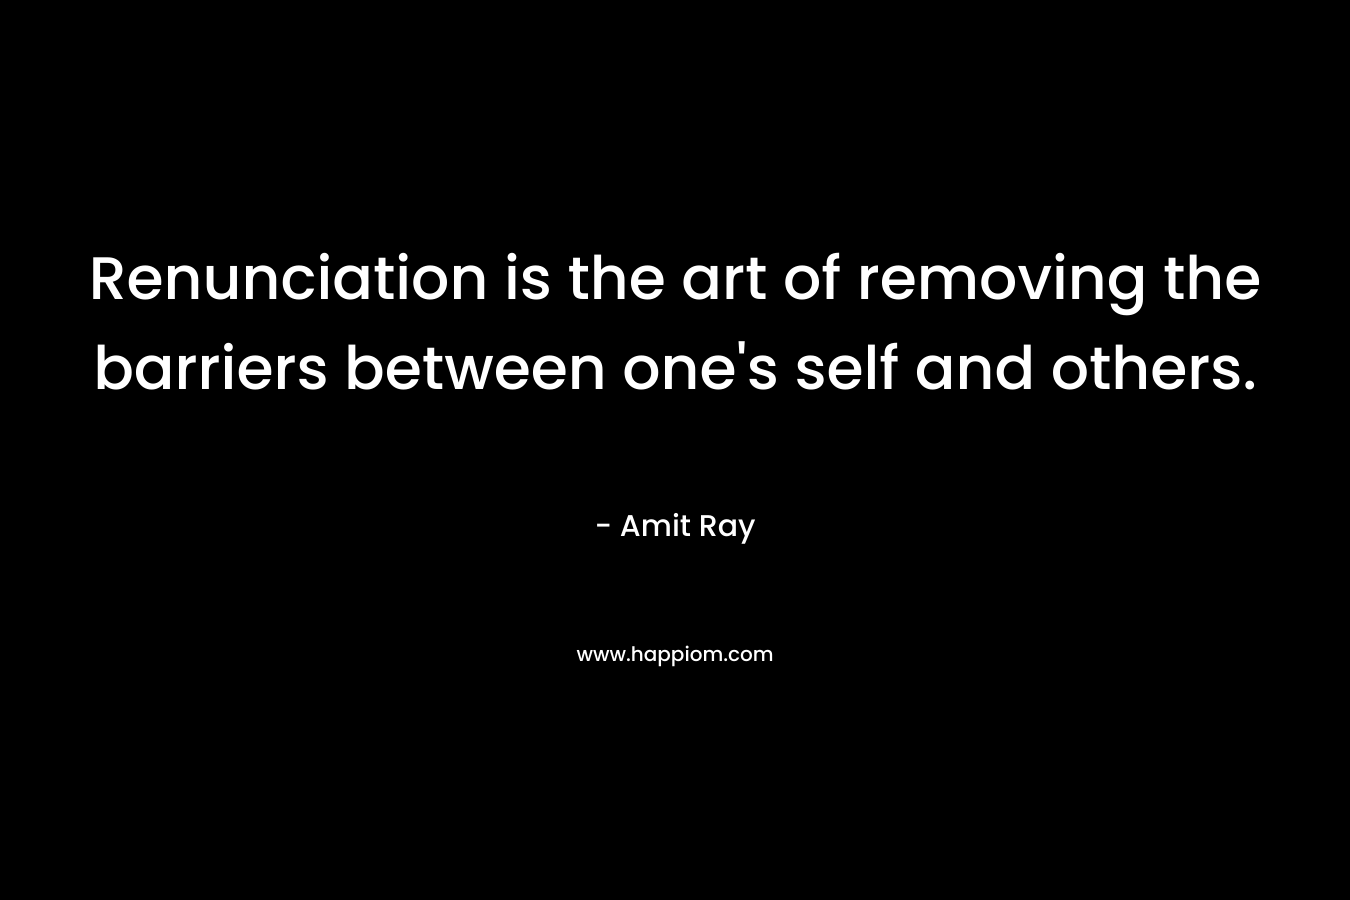 Renunciation is the art of removing the barriers between one's self and others.